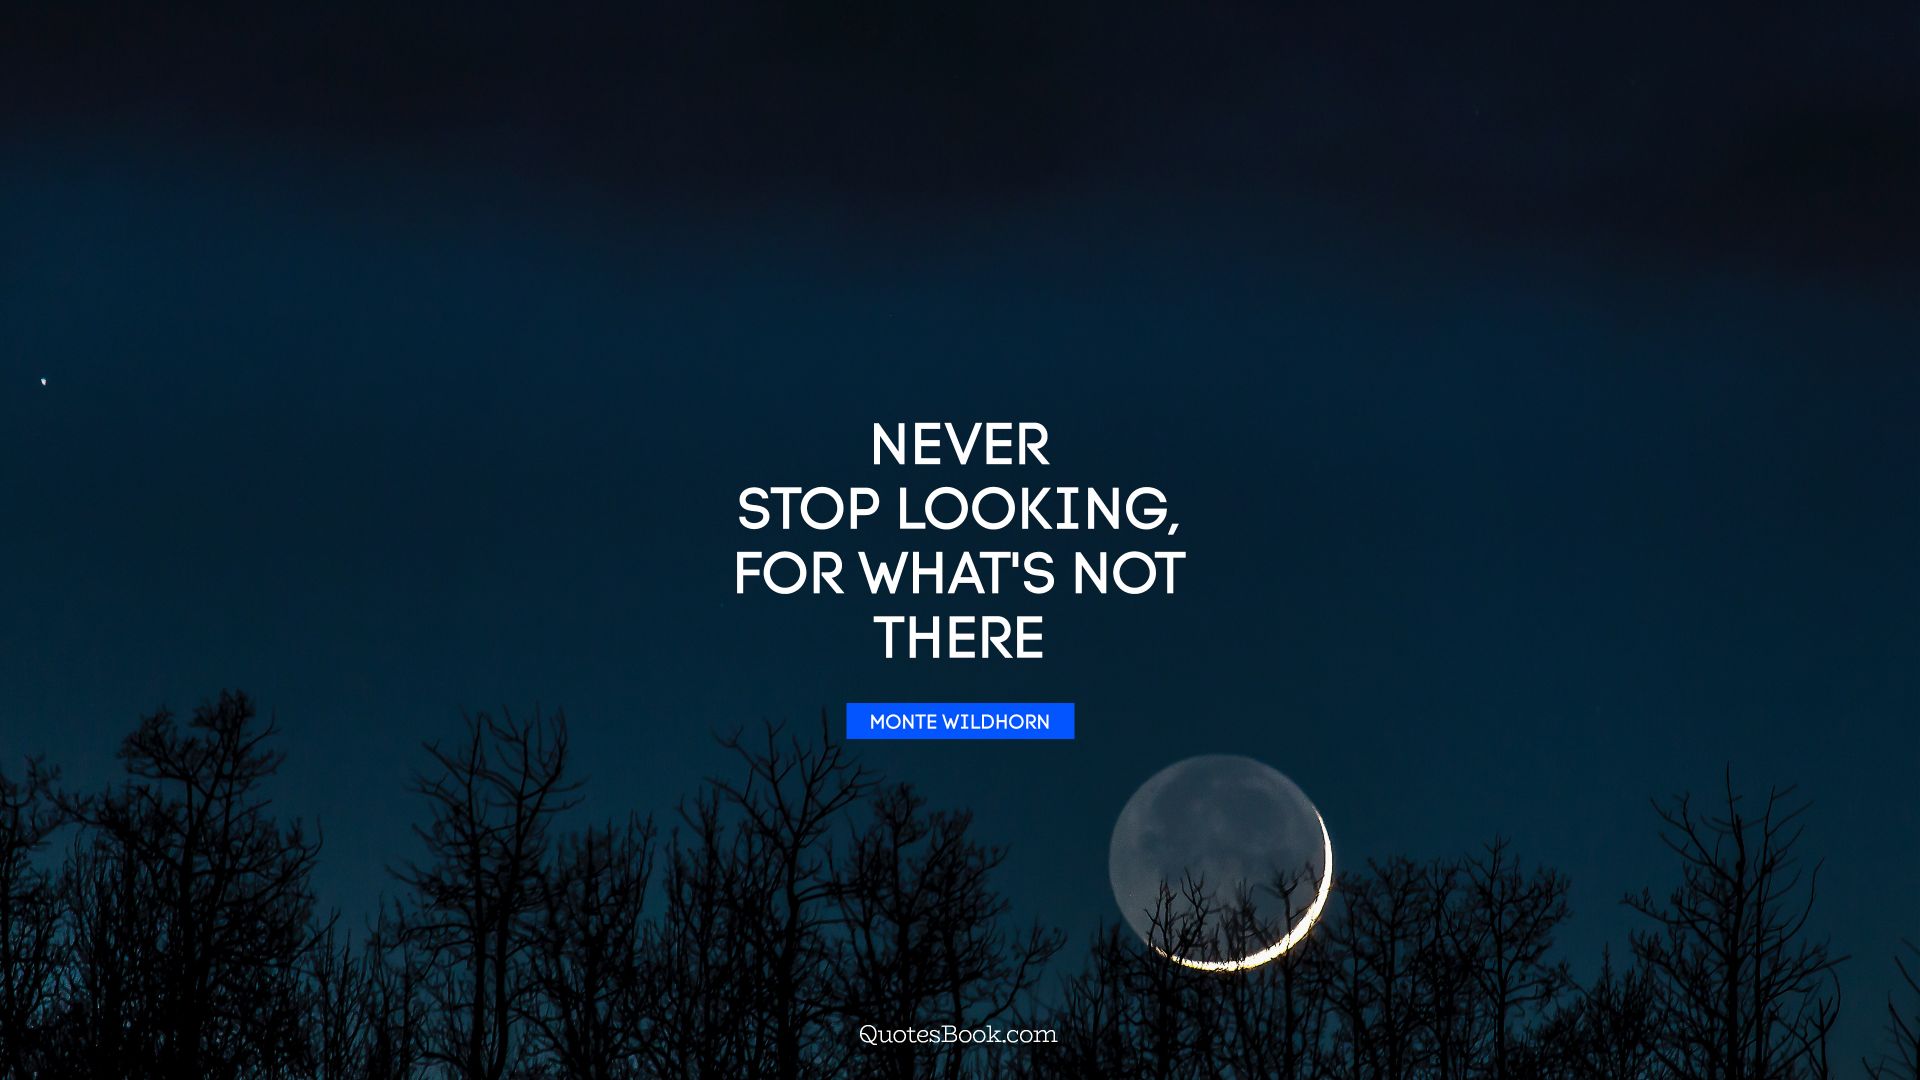 Never stop looking, for what's not there. - Quote by Monte Wildhorn